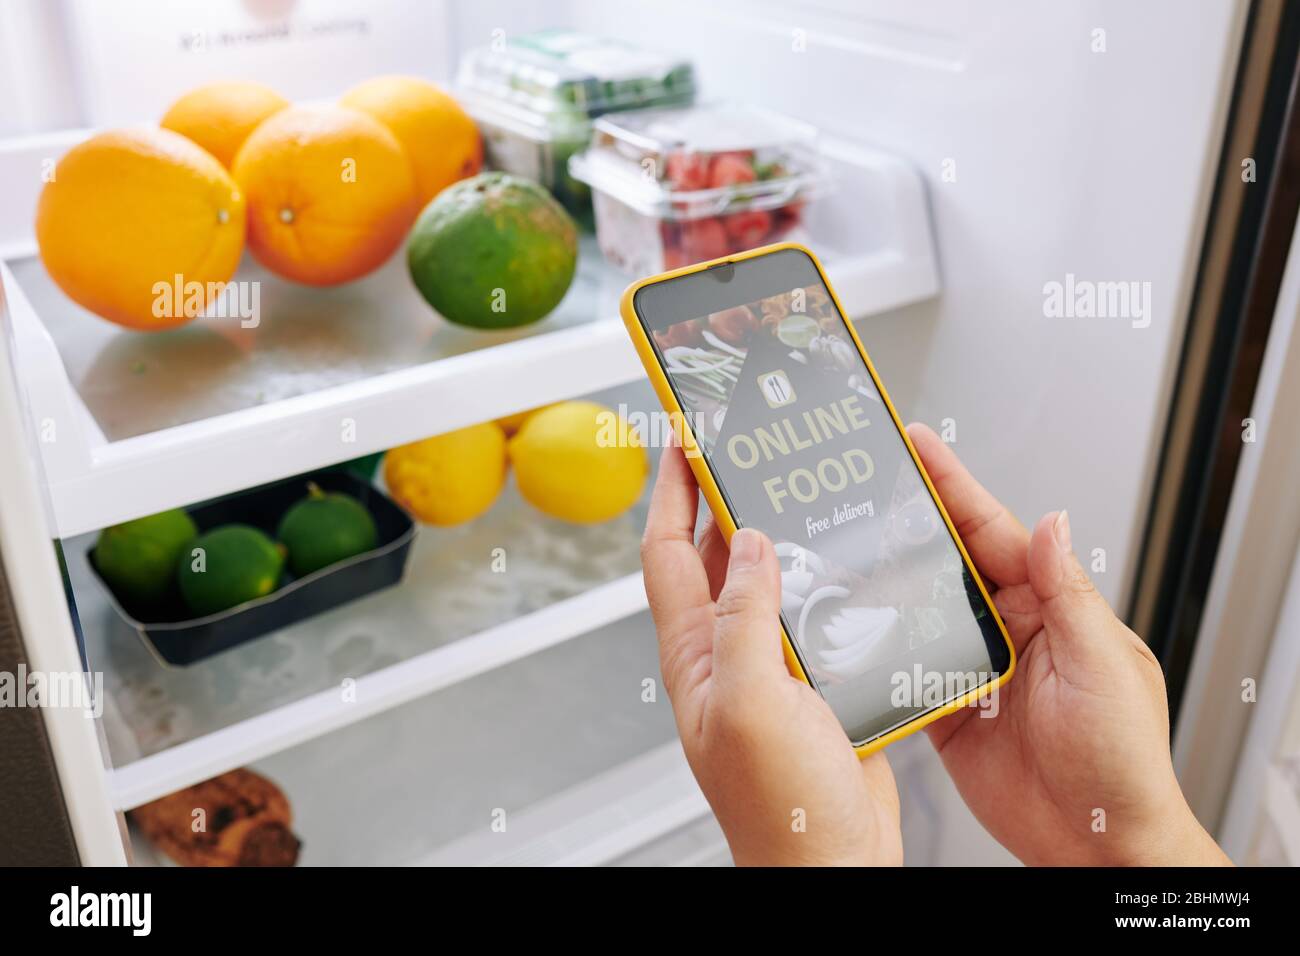 Close-up image of housewife opening refrigerator when observing what she has and ordering products via food delivery application on smartphone Stock Photo